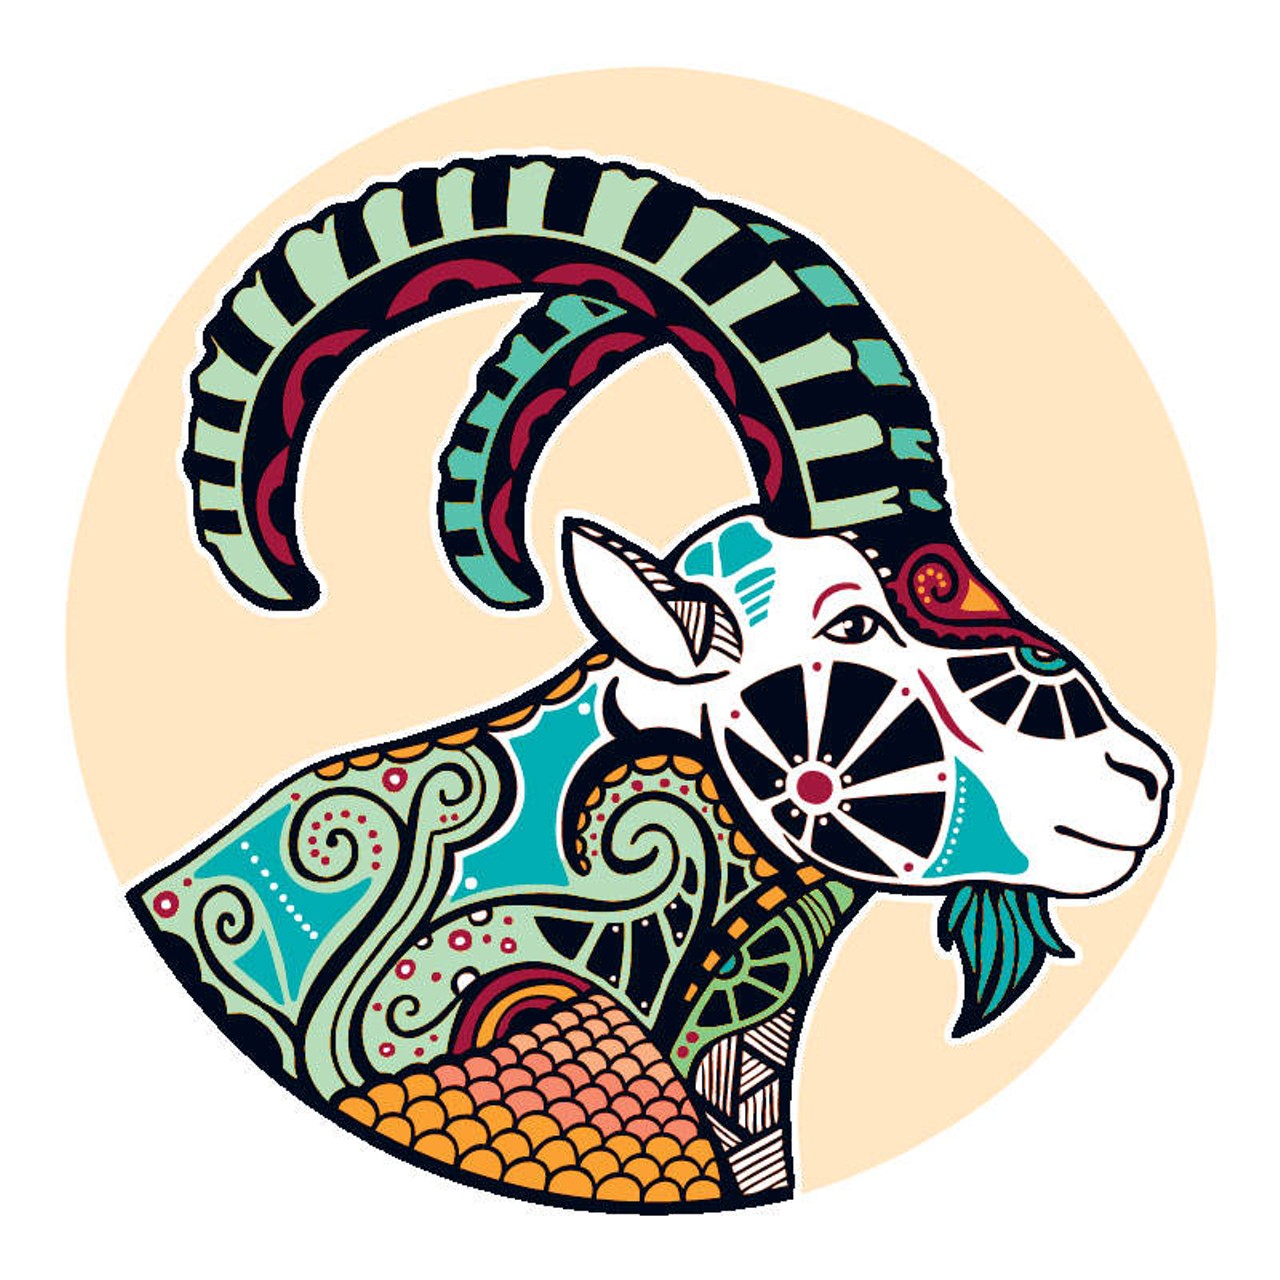 CAPRICORN (Dec. 21-Jan. 20): 
You&#146;d rather be anywhere but here. If it seems as if you have no choice, look around. It&#146;s the time you spend putting out other people&#146;s fires that keeps you stuck. Light one of your own and move on!